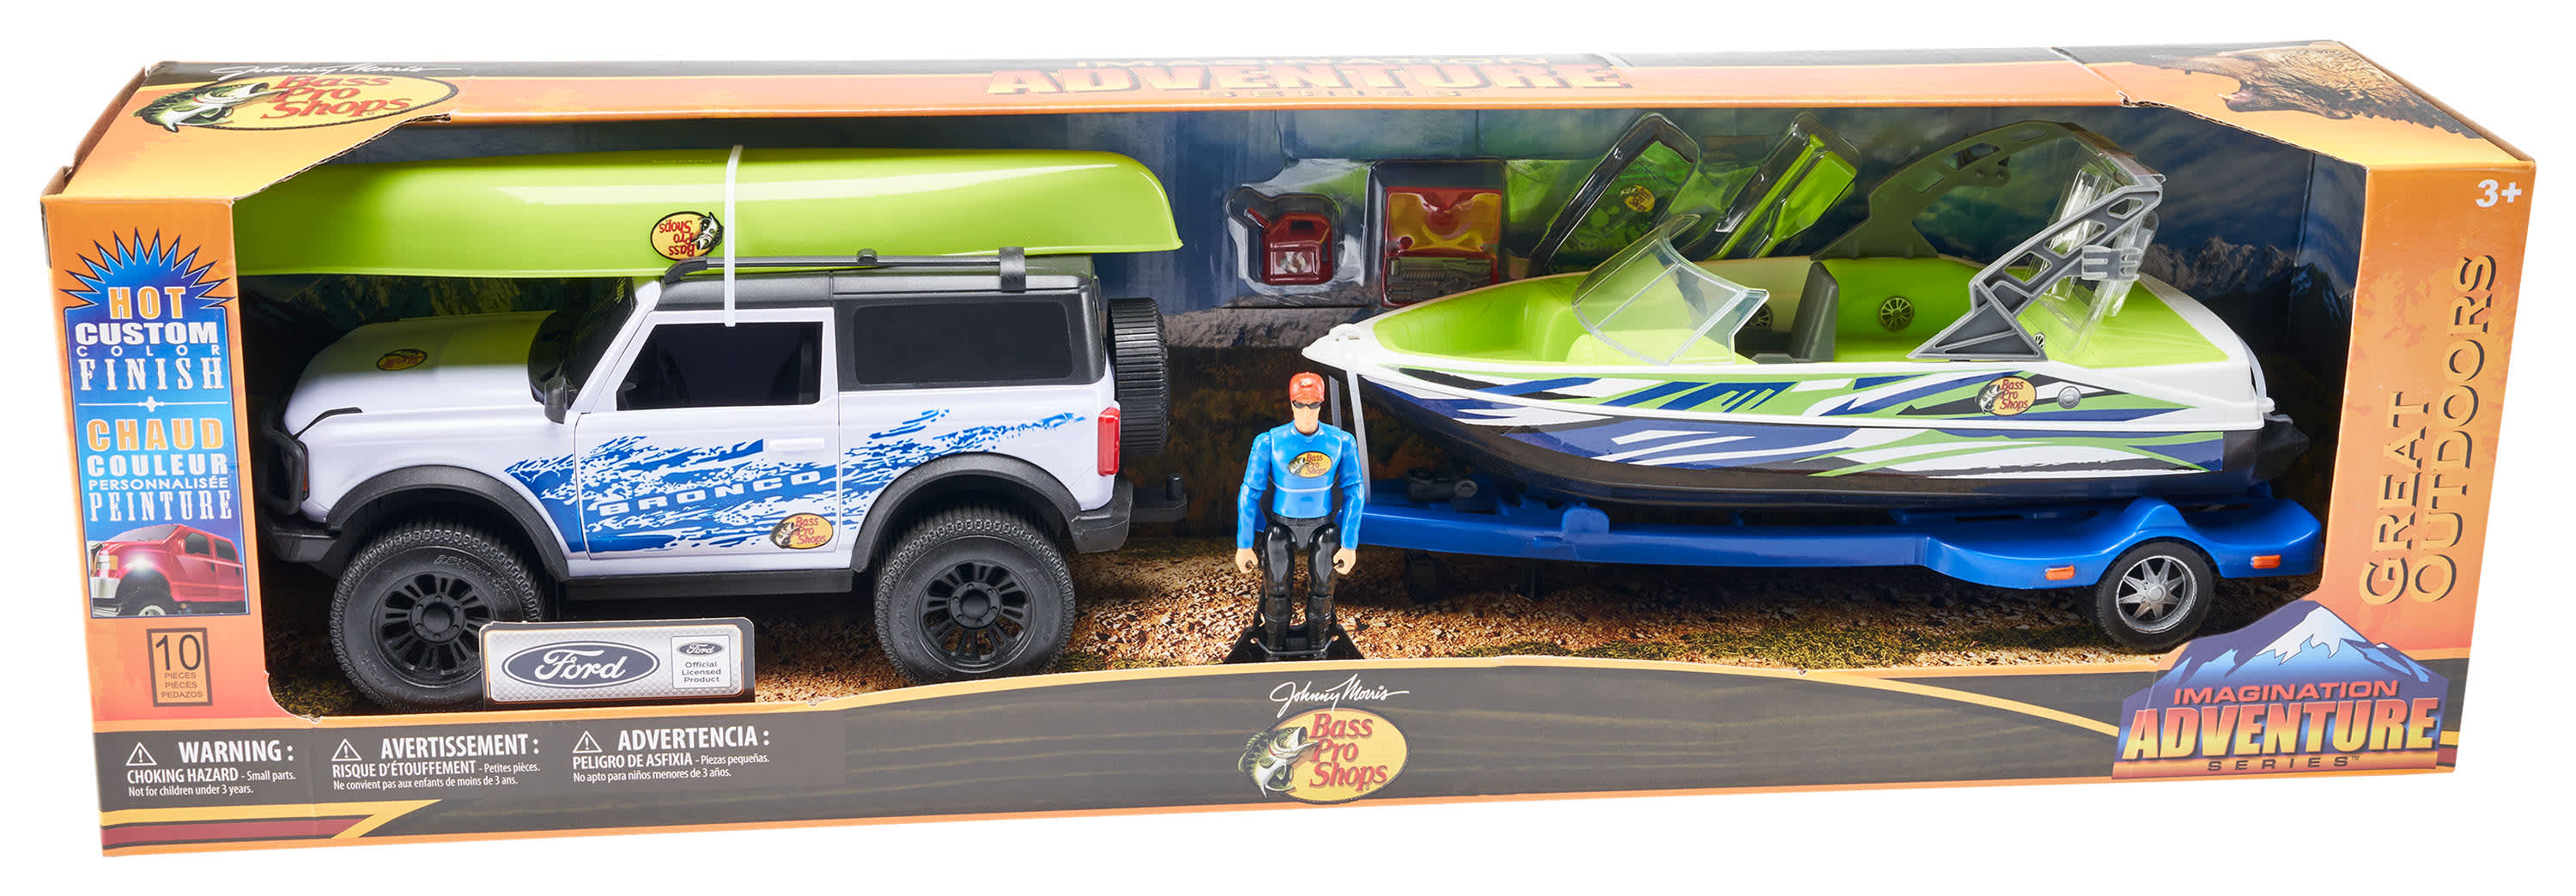 Bass Pro Shops® Deluxe Ford® Bronco® Wake Boat Adventure Playset for Kids